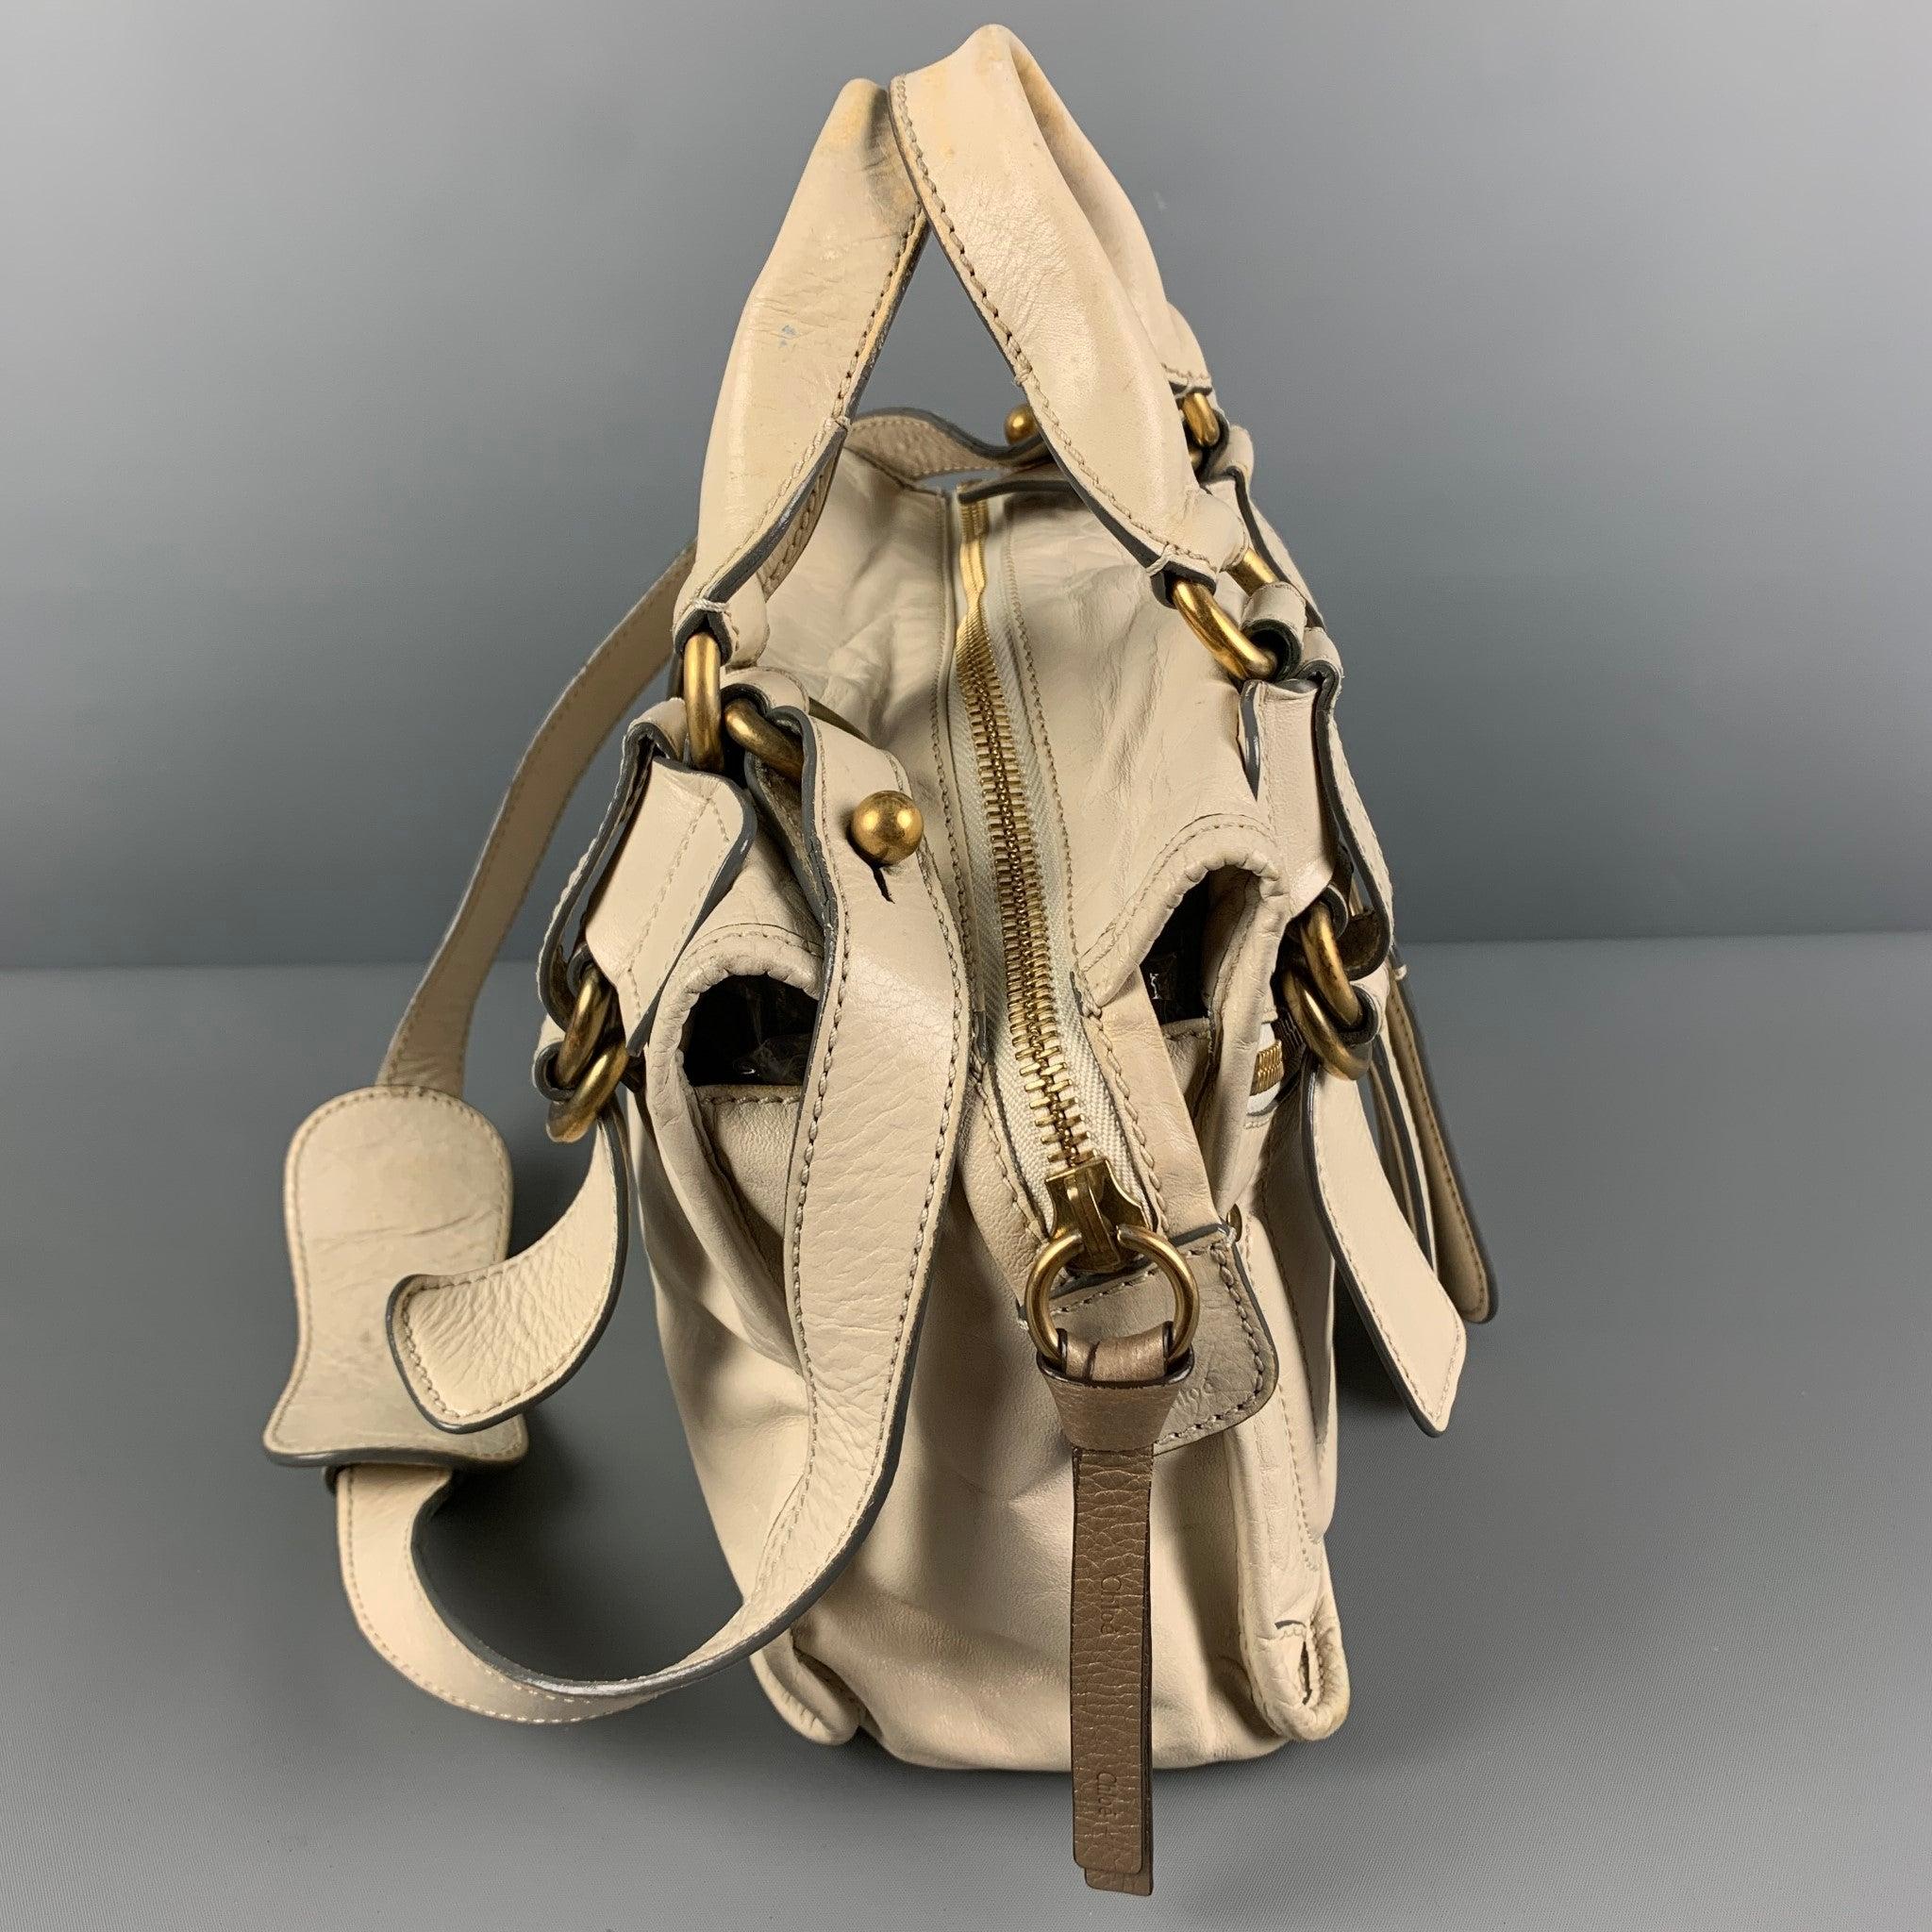 CHLOE bag comes in a beige leather featuring gold tone hardware, top handles, detachable shoulder straps, front pockets, inner pocket, and a top zipper closure. Made in Italy.
 Good
 Pre-Owned Condition. Moderate wear throughout. As-Is.  
 

